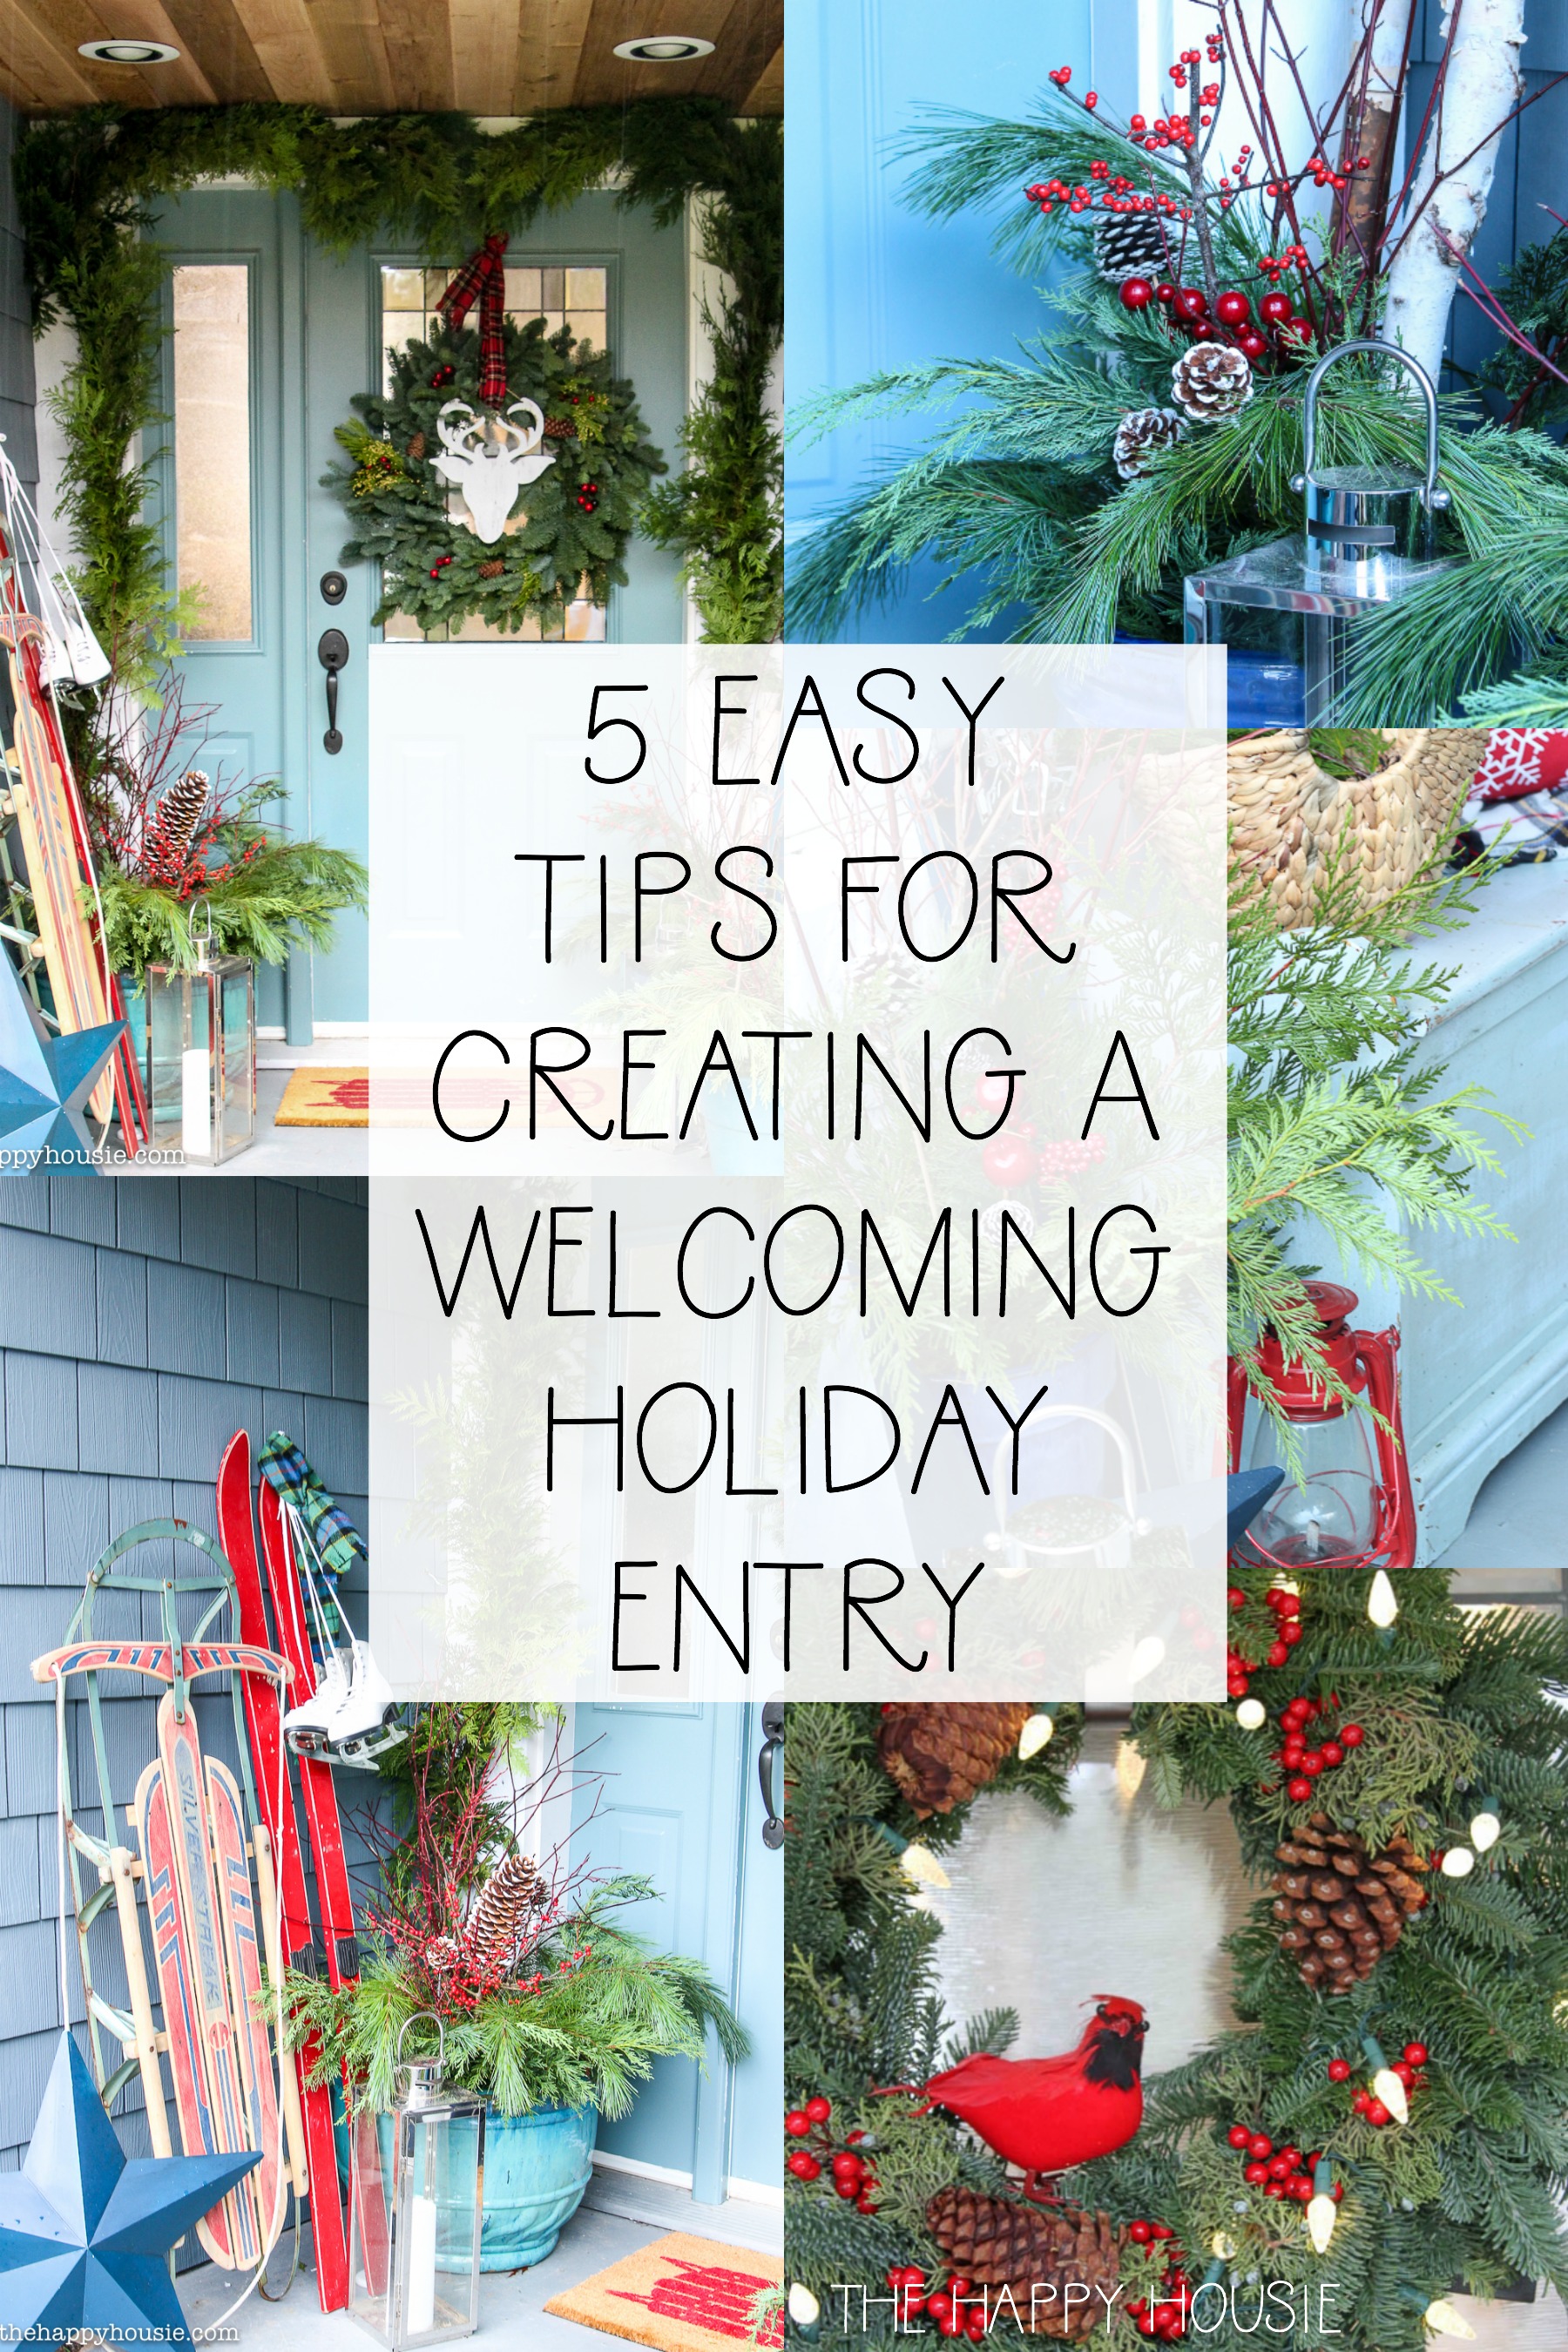 5 Easy tips for creating a welcoming holiday entry poster.